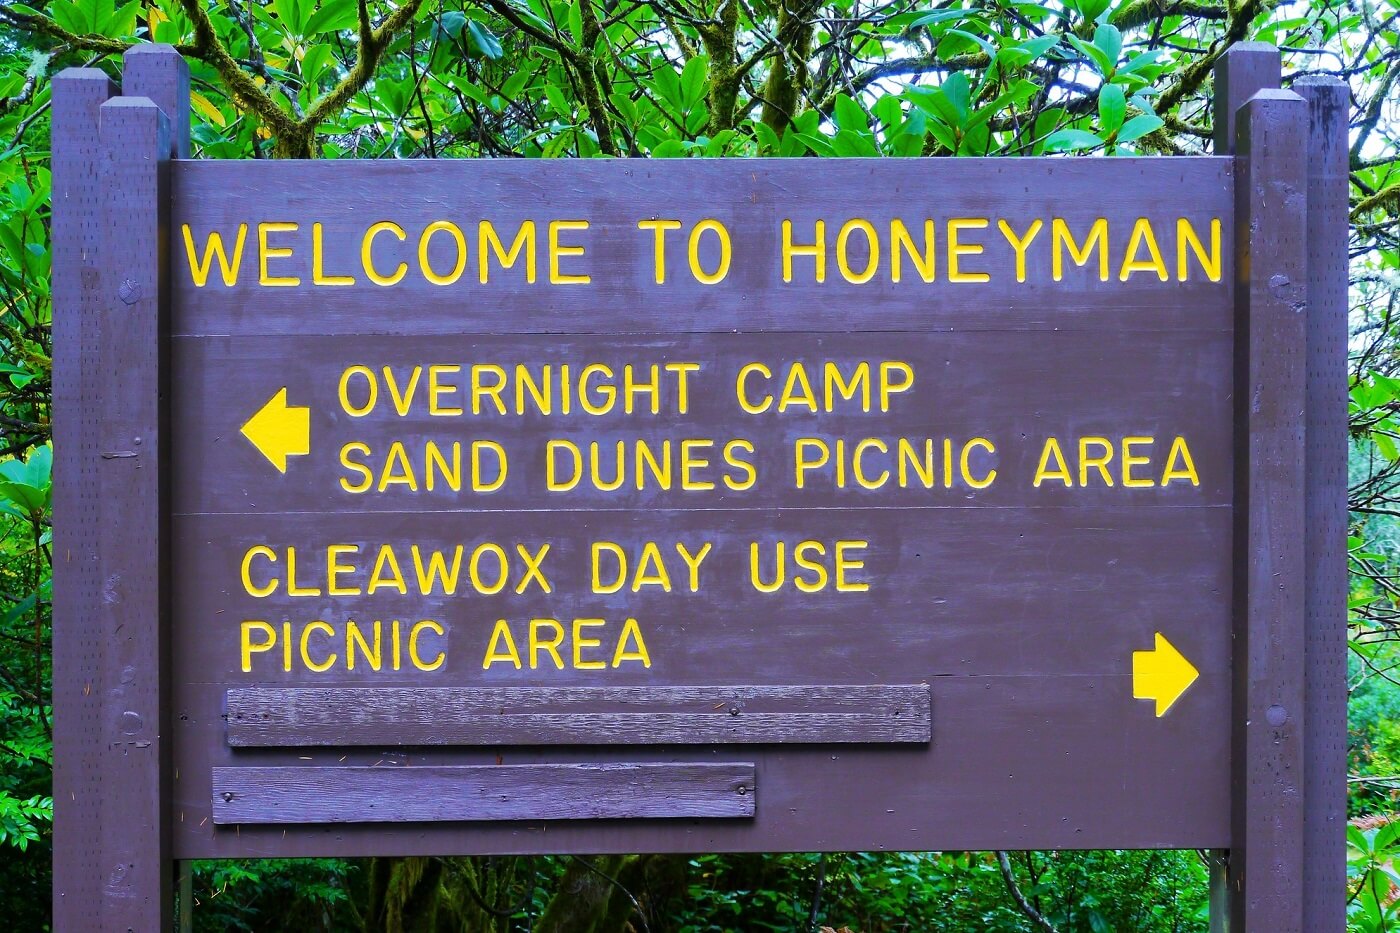 Welcome to Honeyman State Park sign